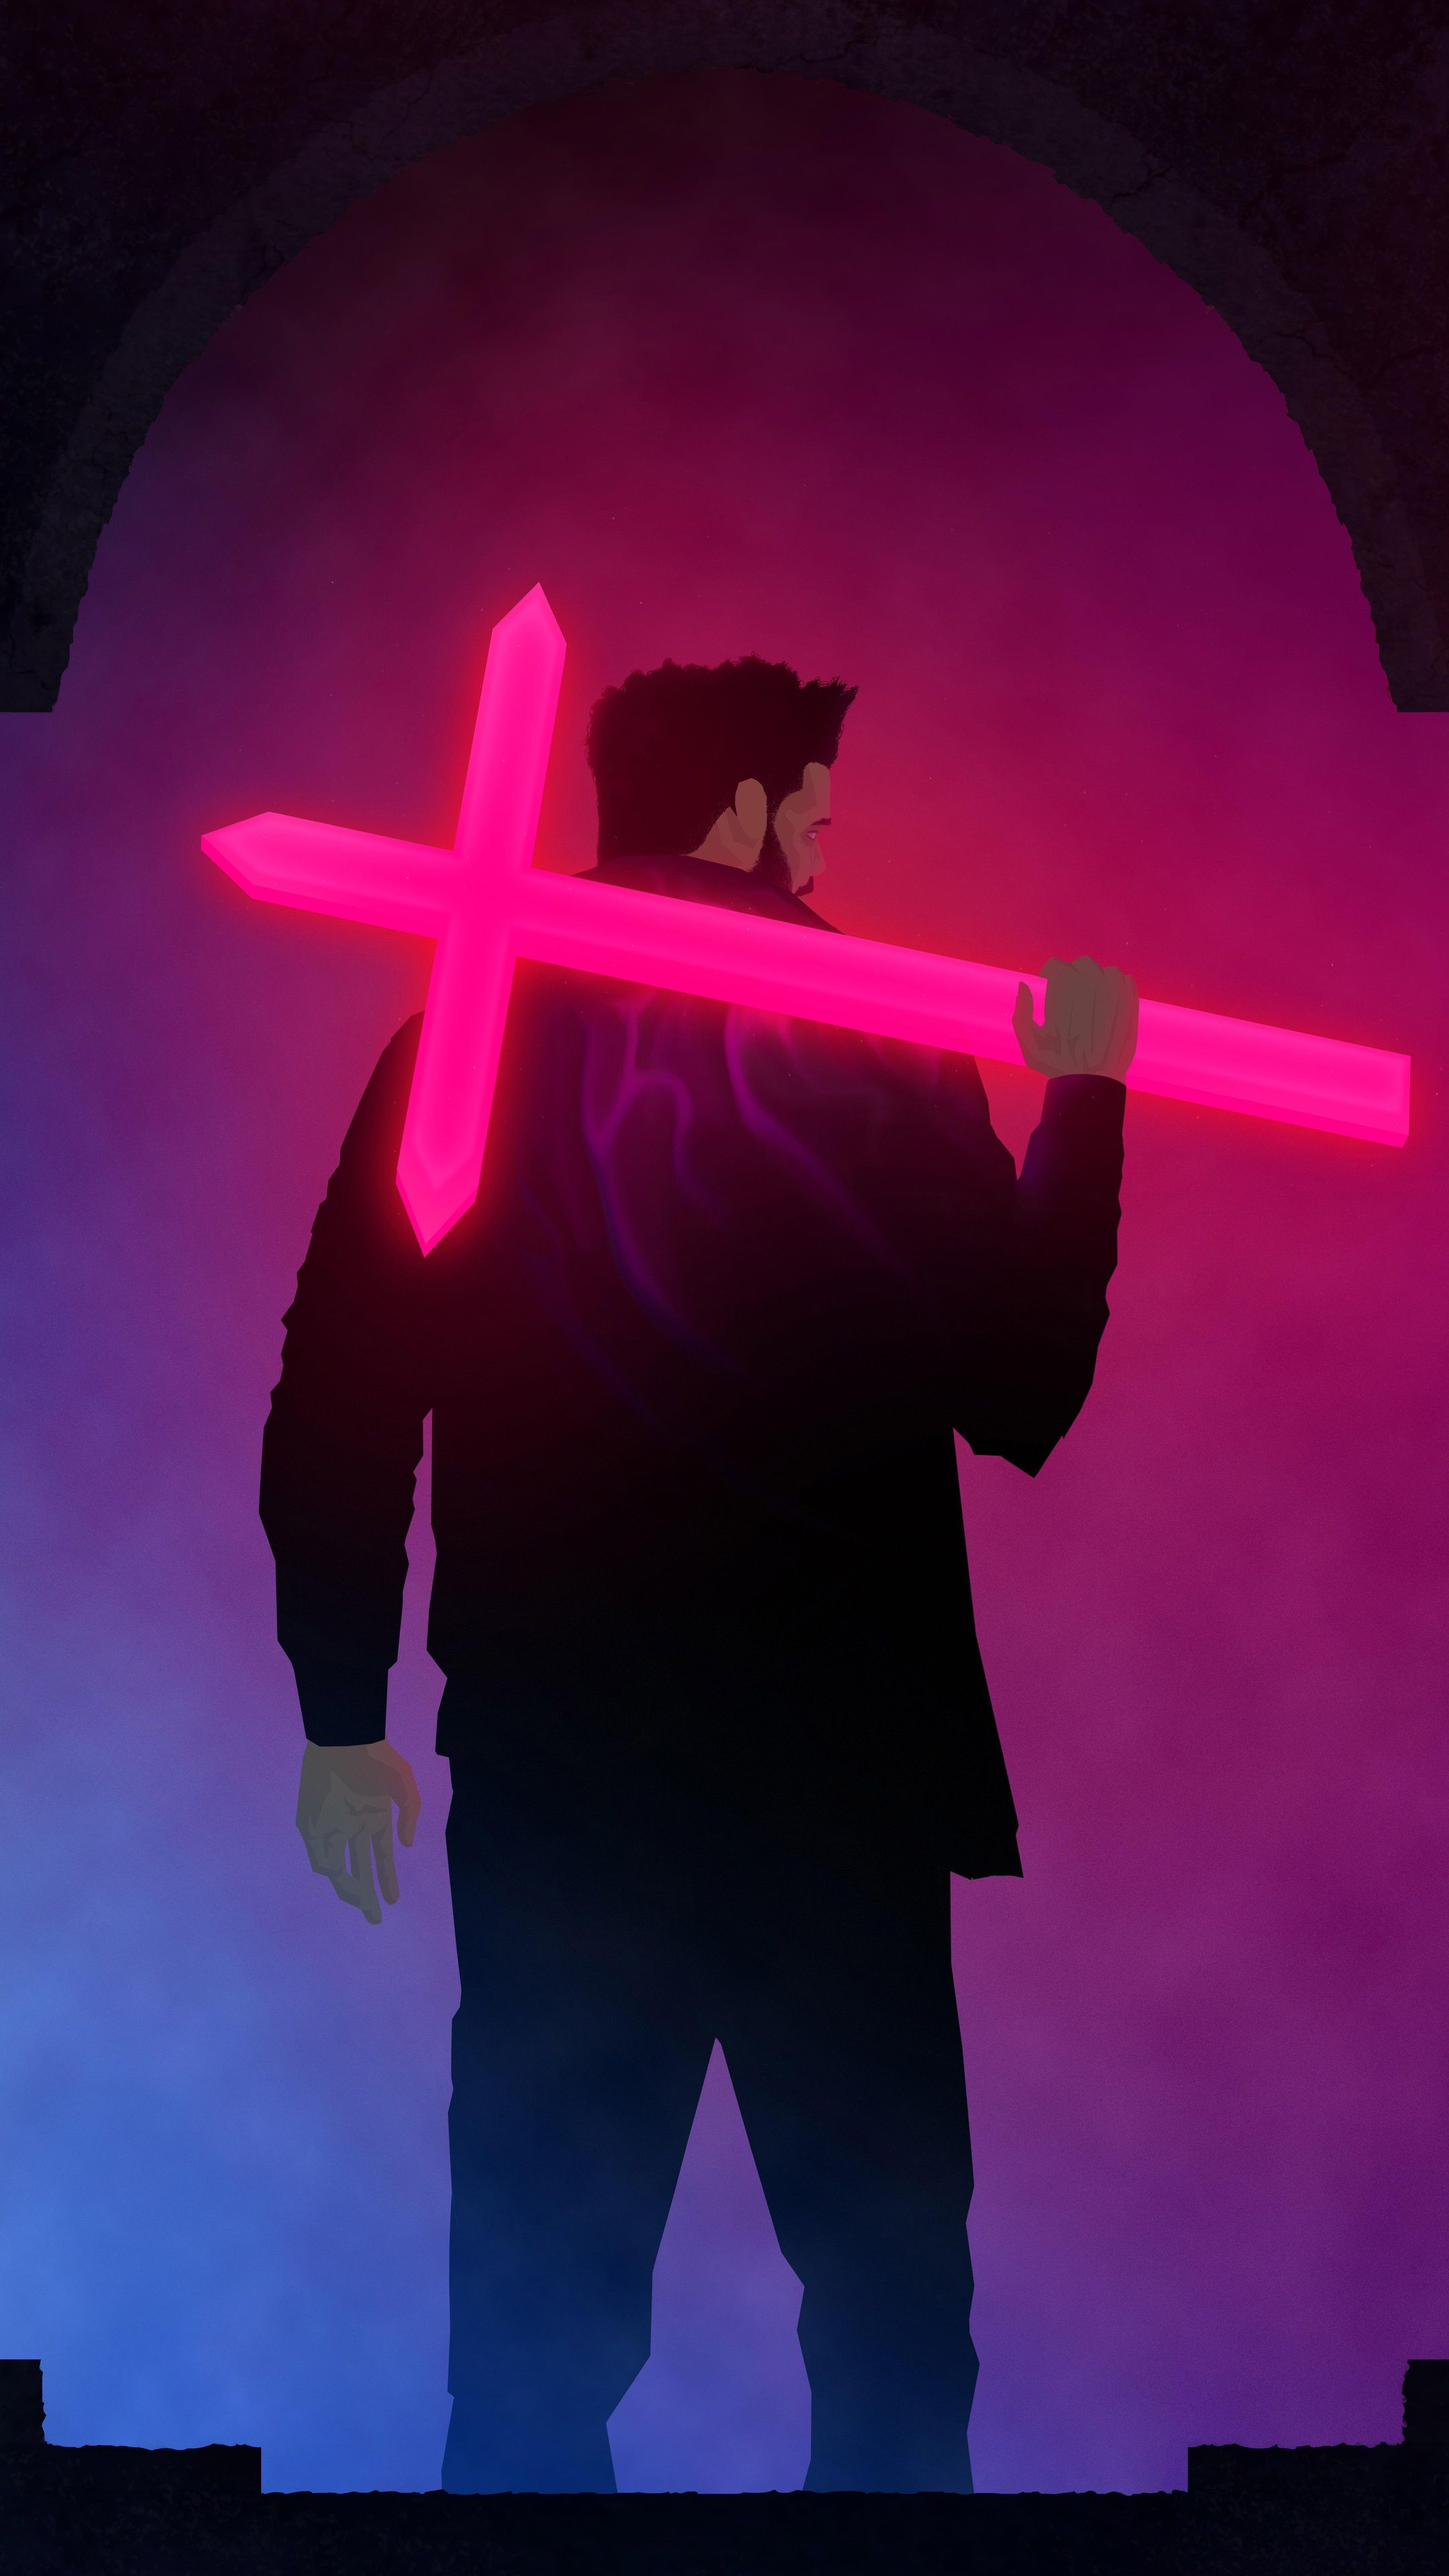 A man holding a glowing pink sword. - The Weeknd